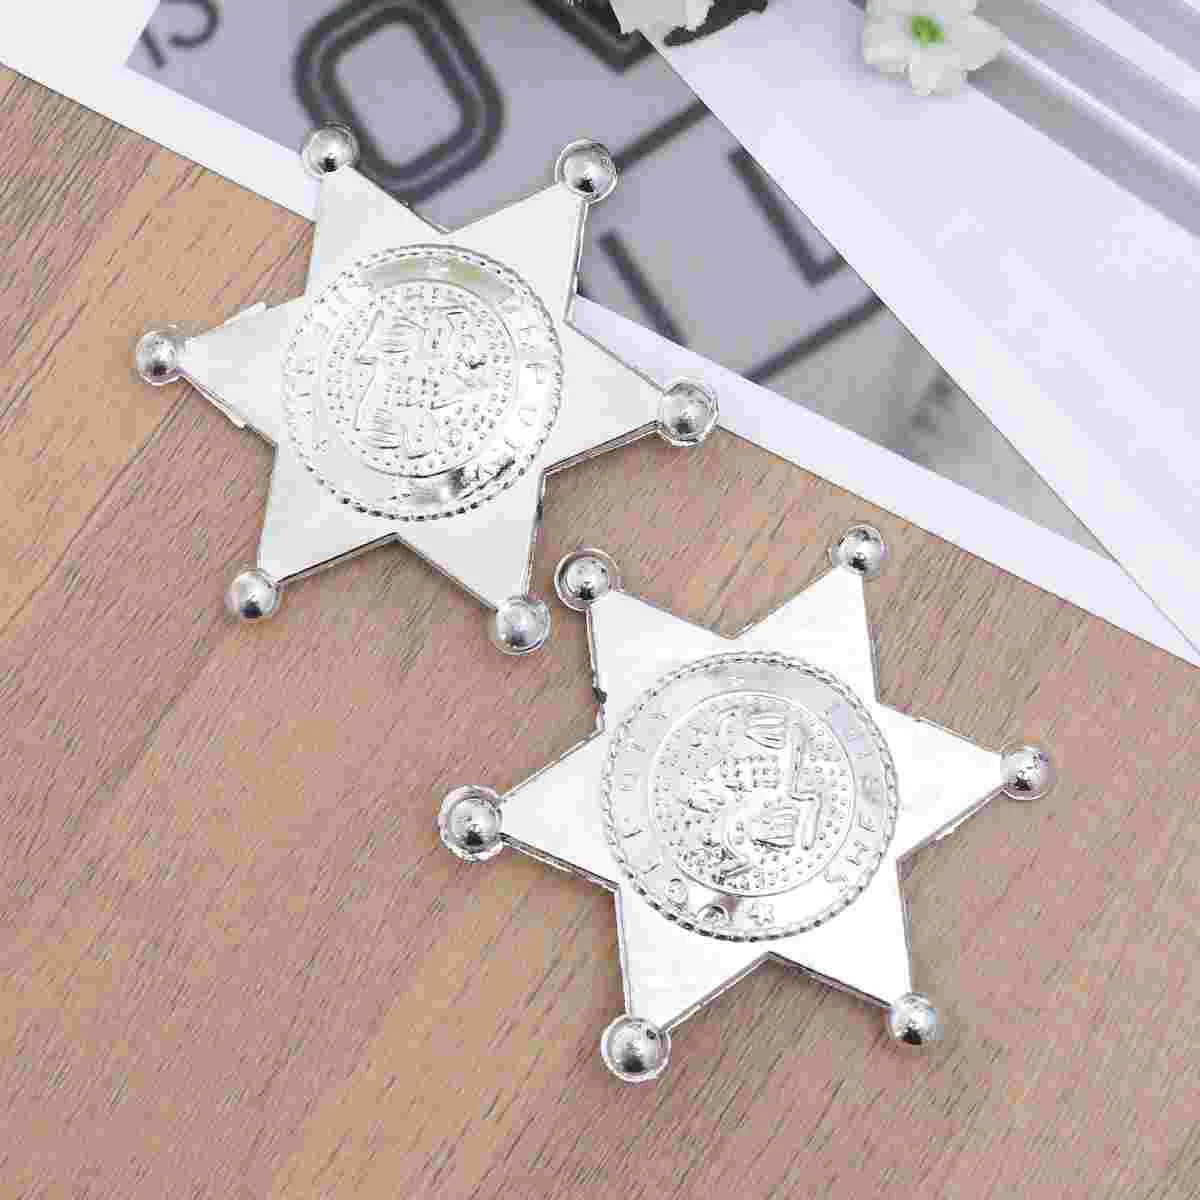 

12pcs Deputy Sheriff Hexagonal Star Badges Personalized Officer Name Tags Brooch for Law Enforcement Officer Costume